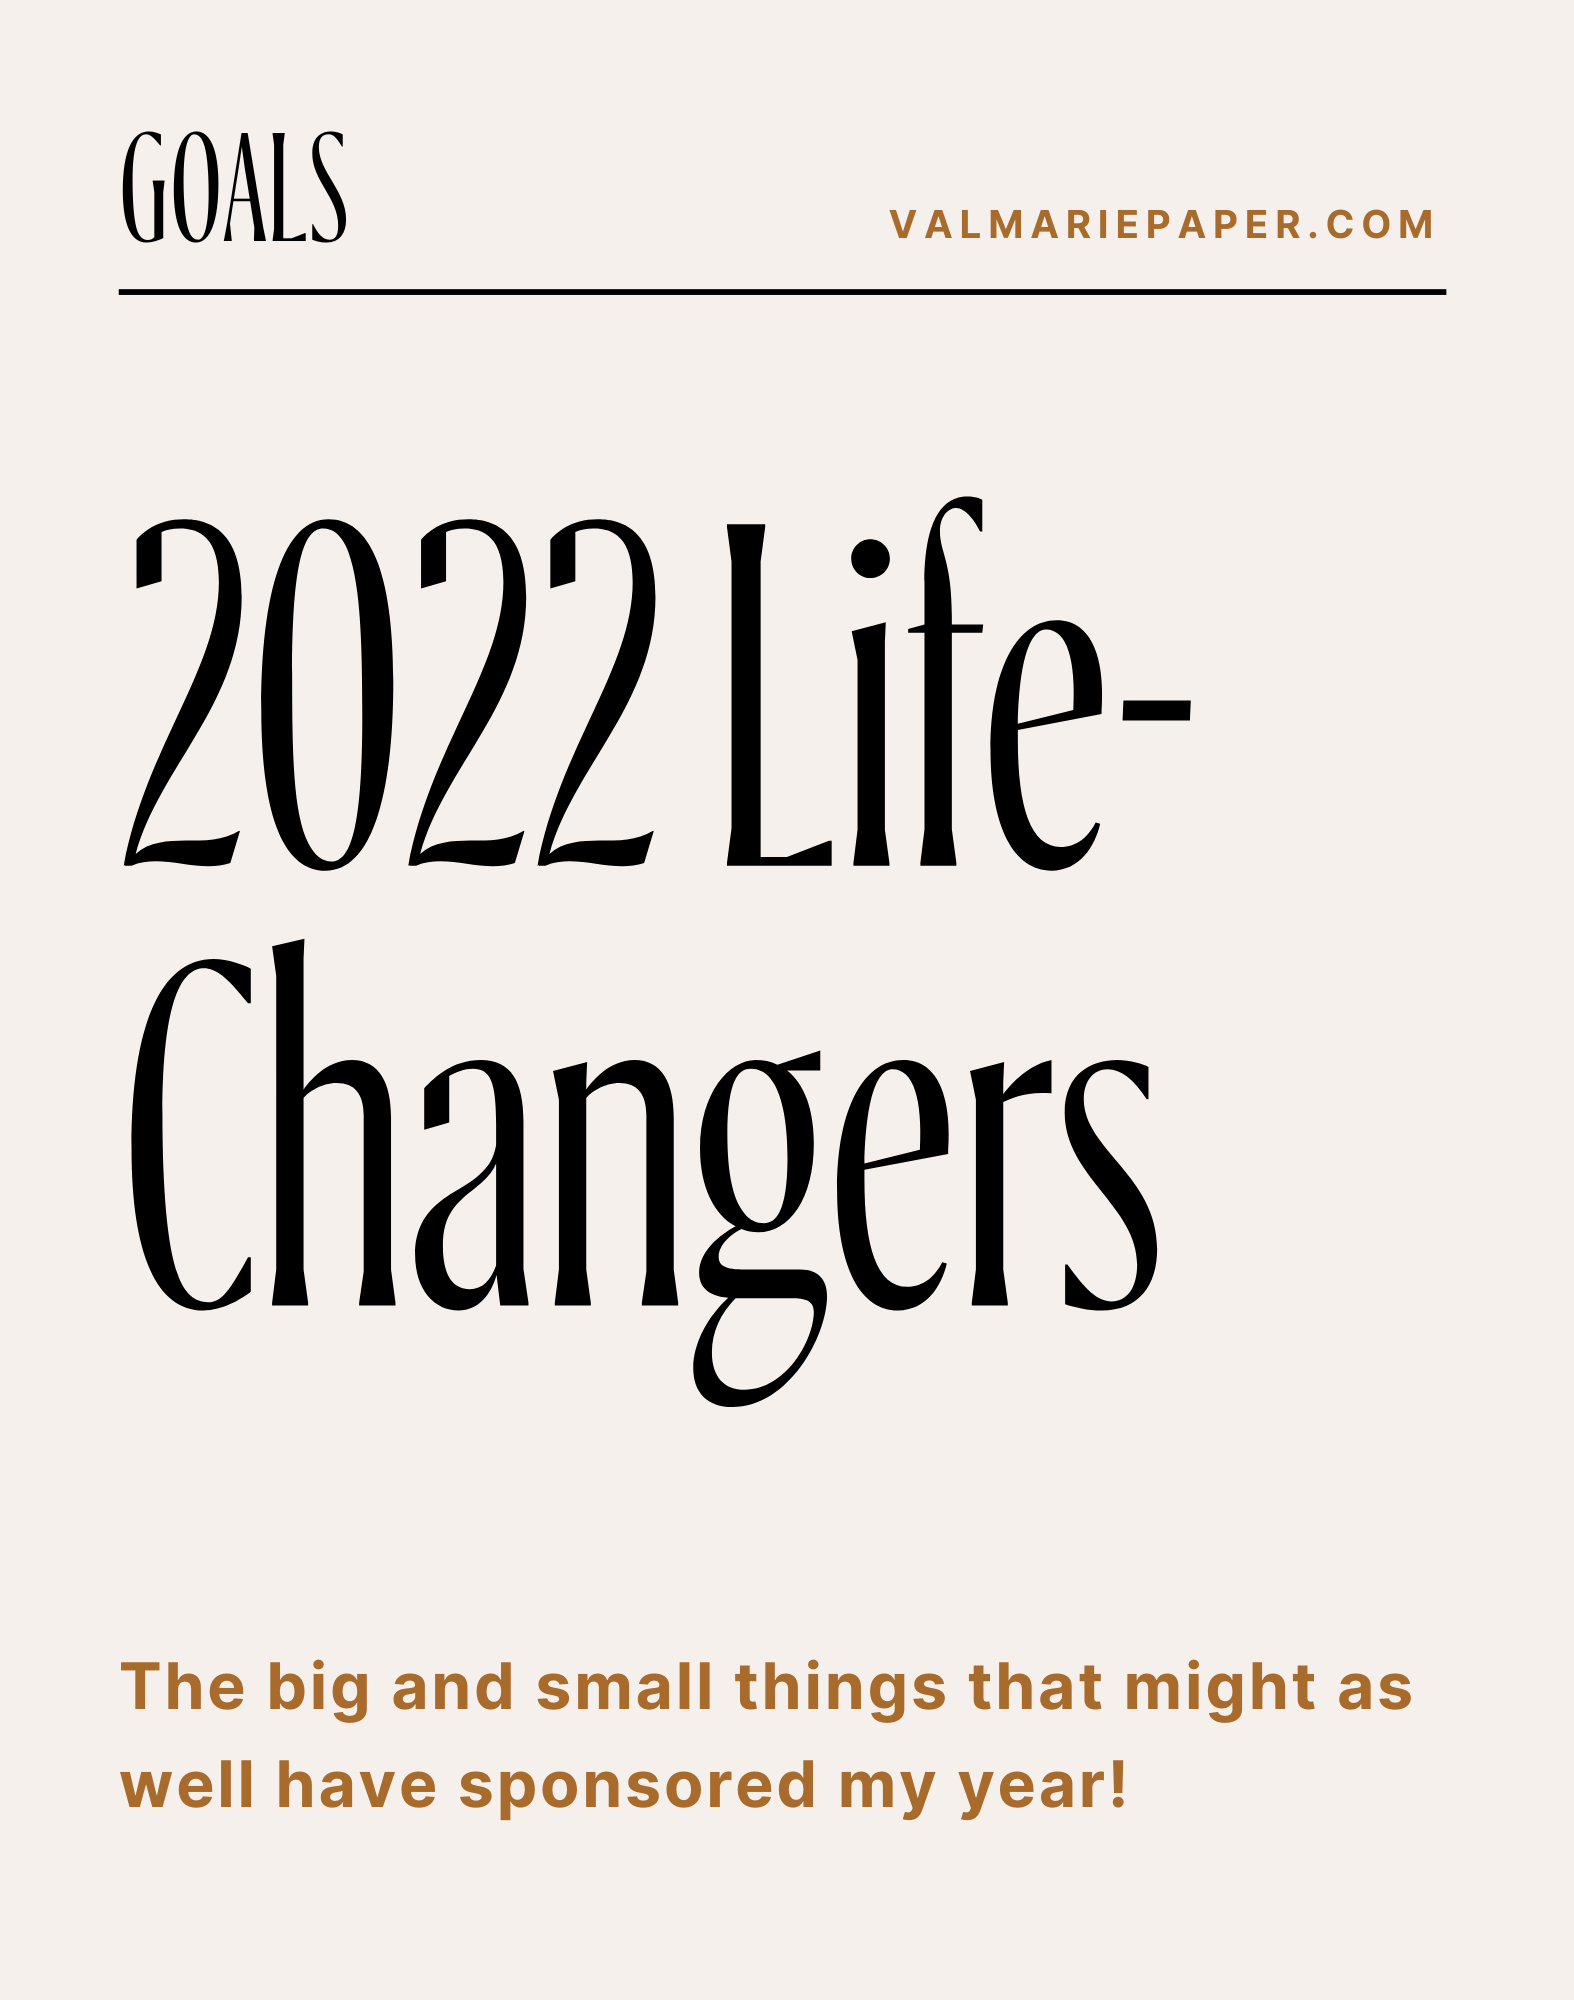 2022 Life-Changers by Valerie Woerner, prayer journal, women's ministry, prayer, refresh, meditation, how to make a prayer journal, praying for your kids, husband, prayer warrior, war room, Bible study, tools, prayer notebook, how to pray, community, small group, bible study, 2021 life-changers, goals, annual goals